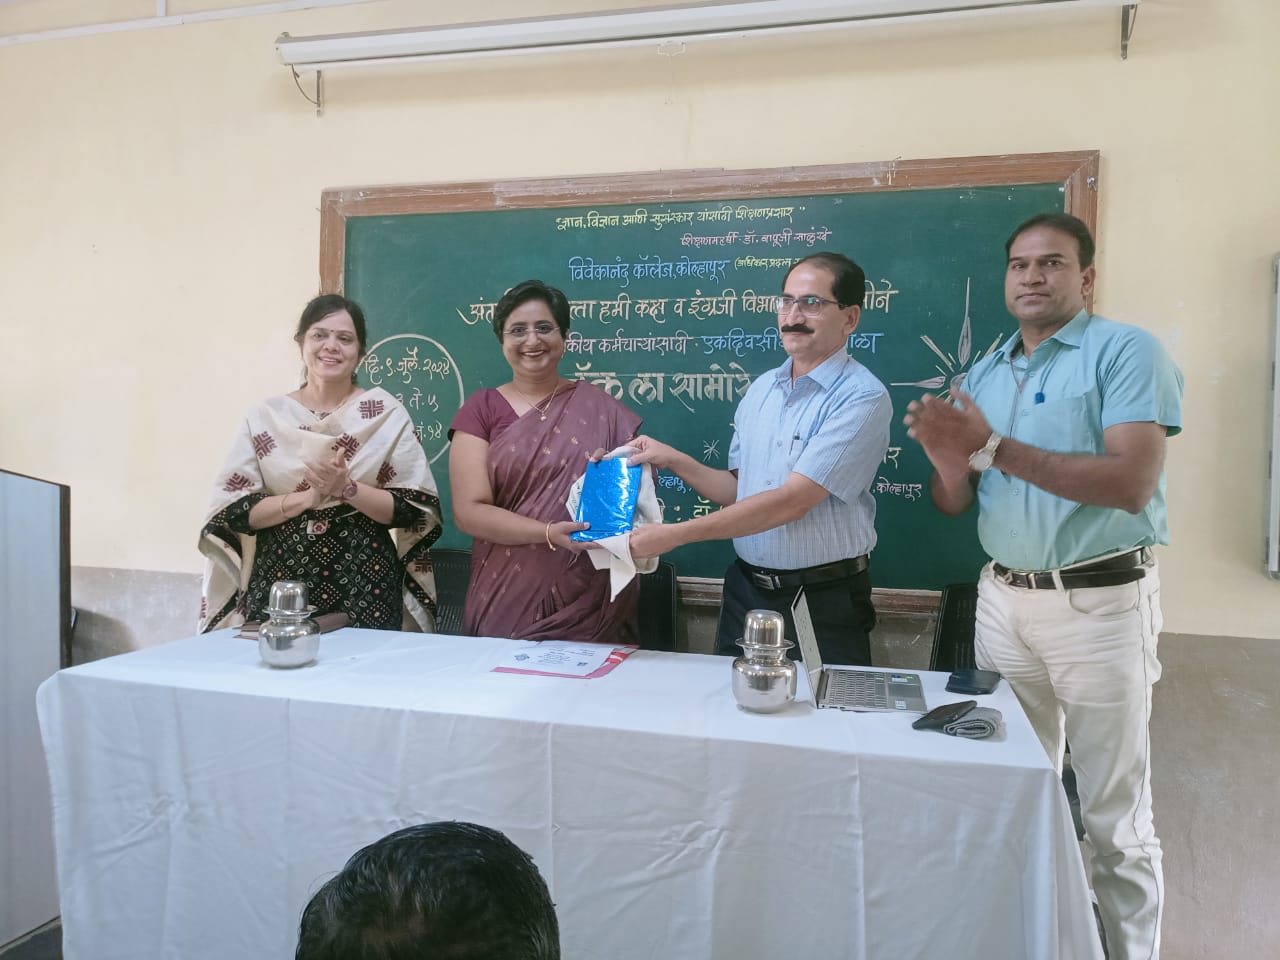 A workshop for administrative staff was held in Vivekananda in association with IQAC and English department